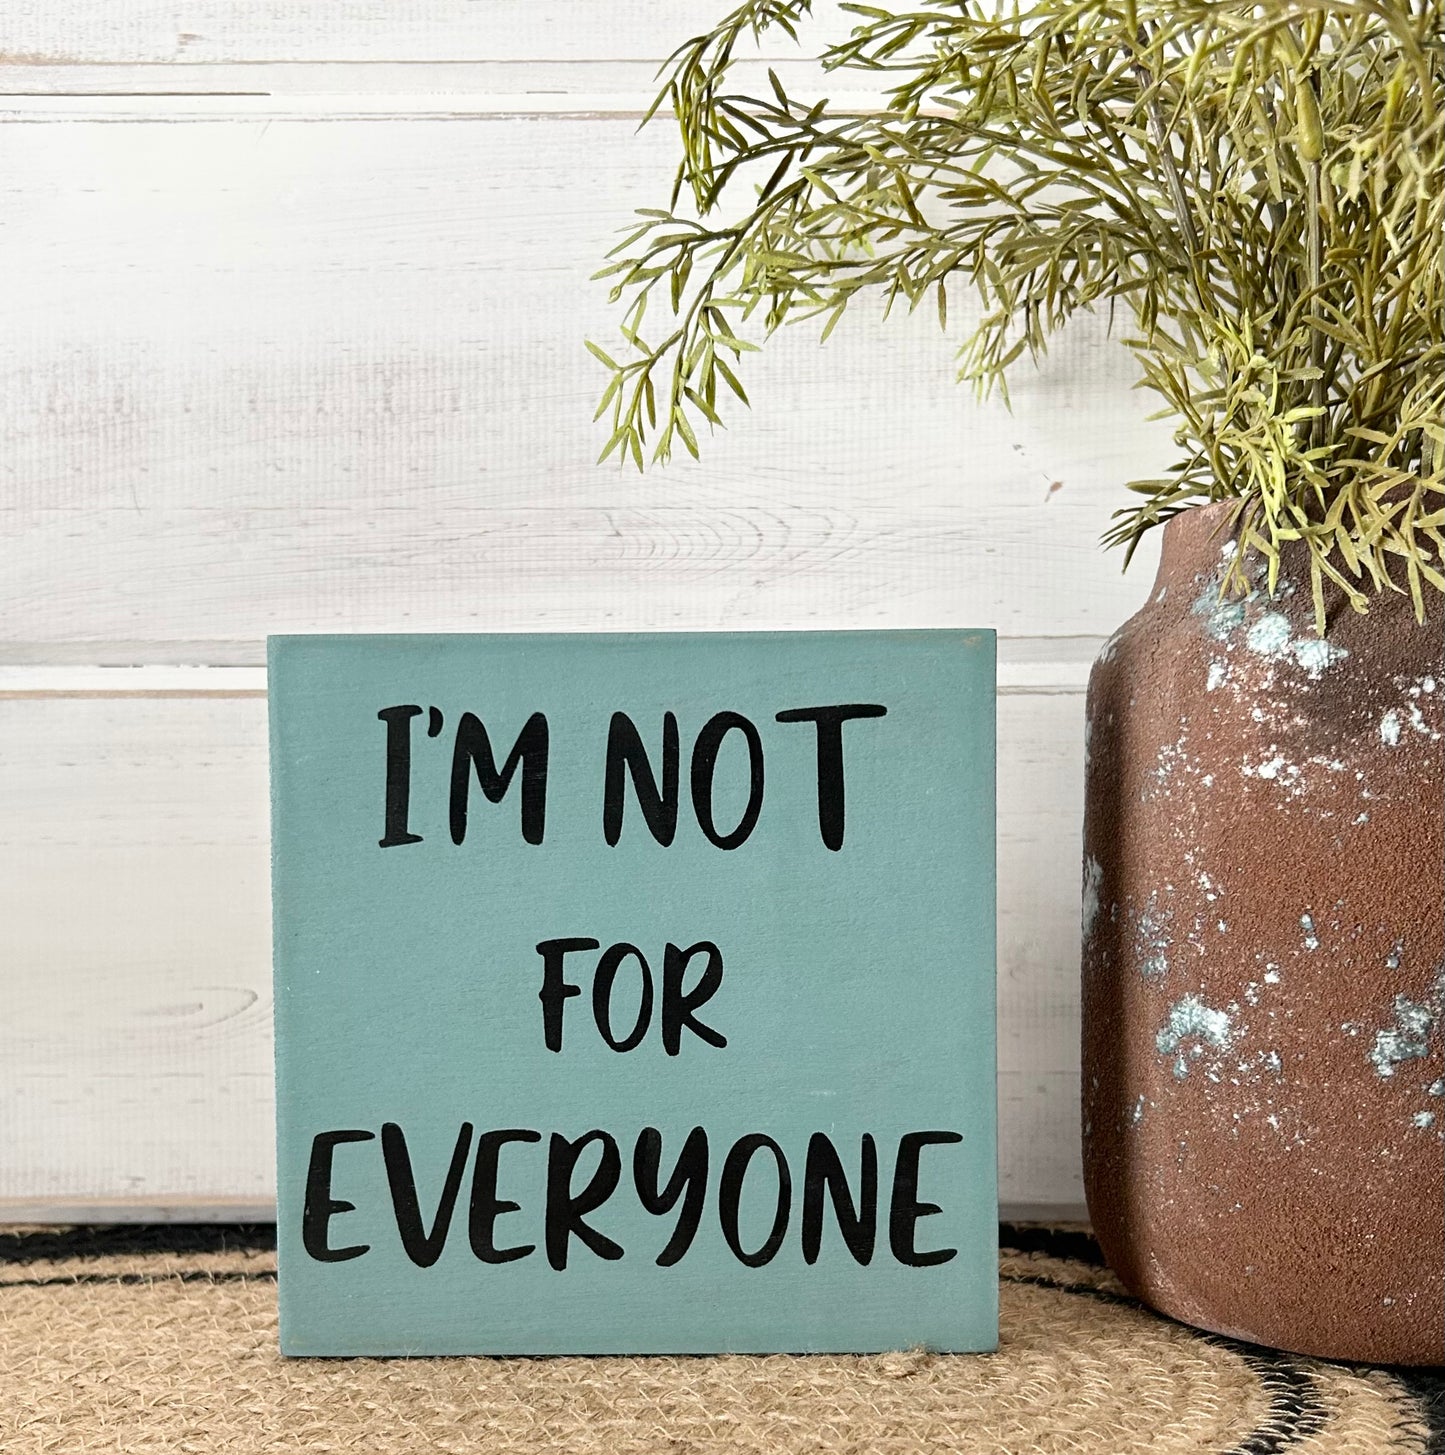 I’m Not For Everyone - Funny Rustic Shelf Sign